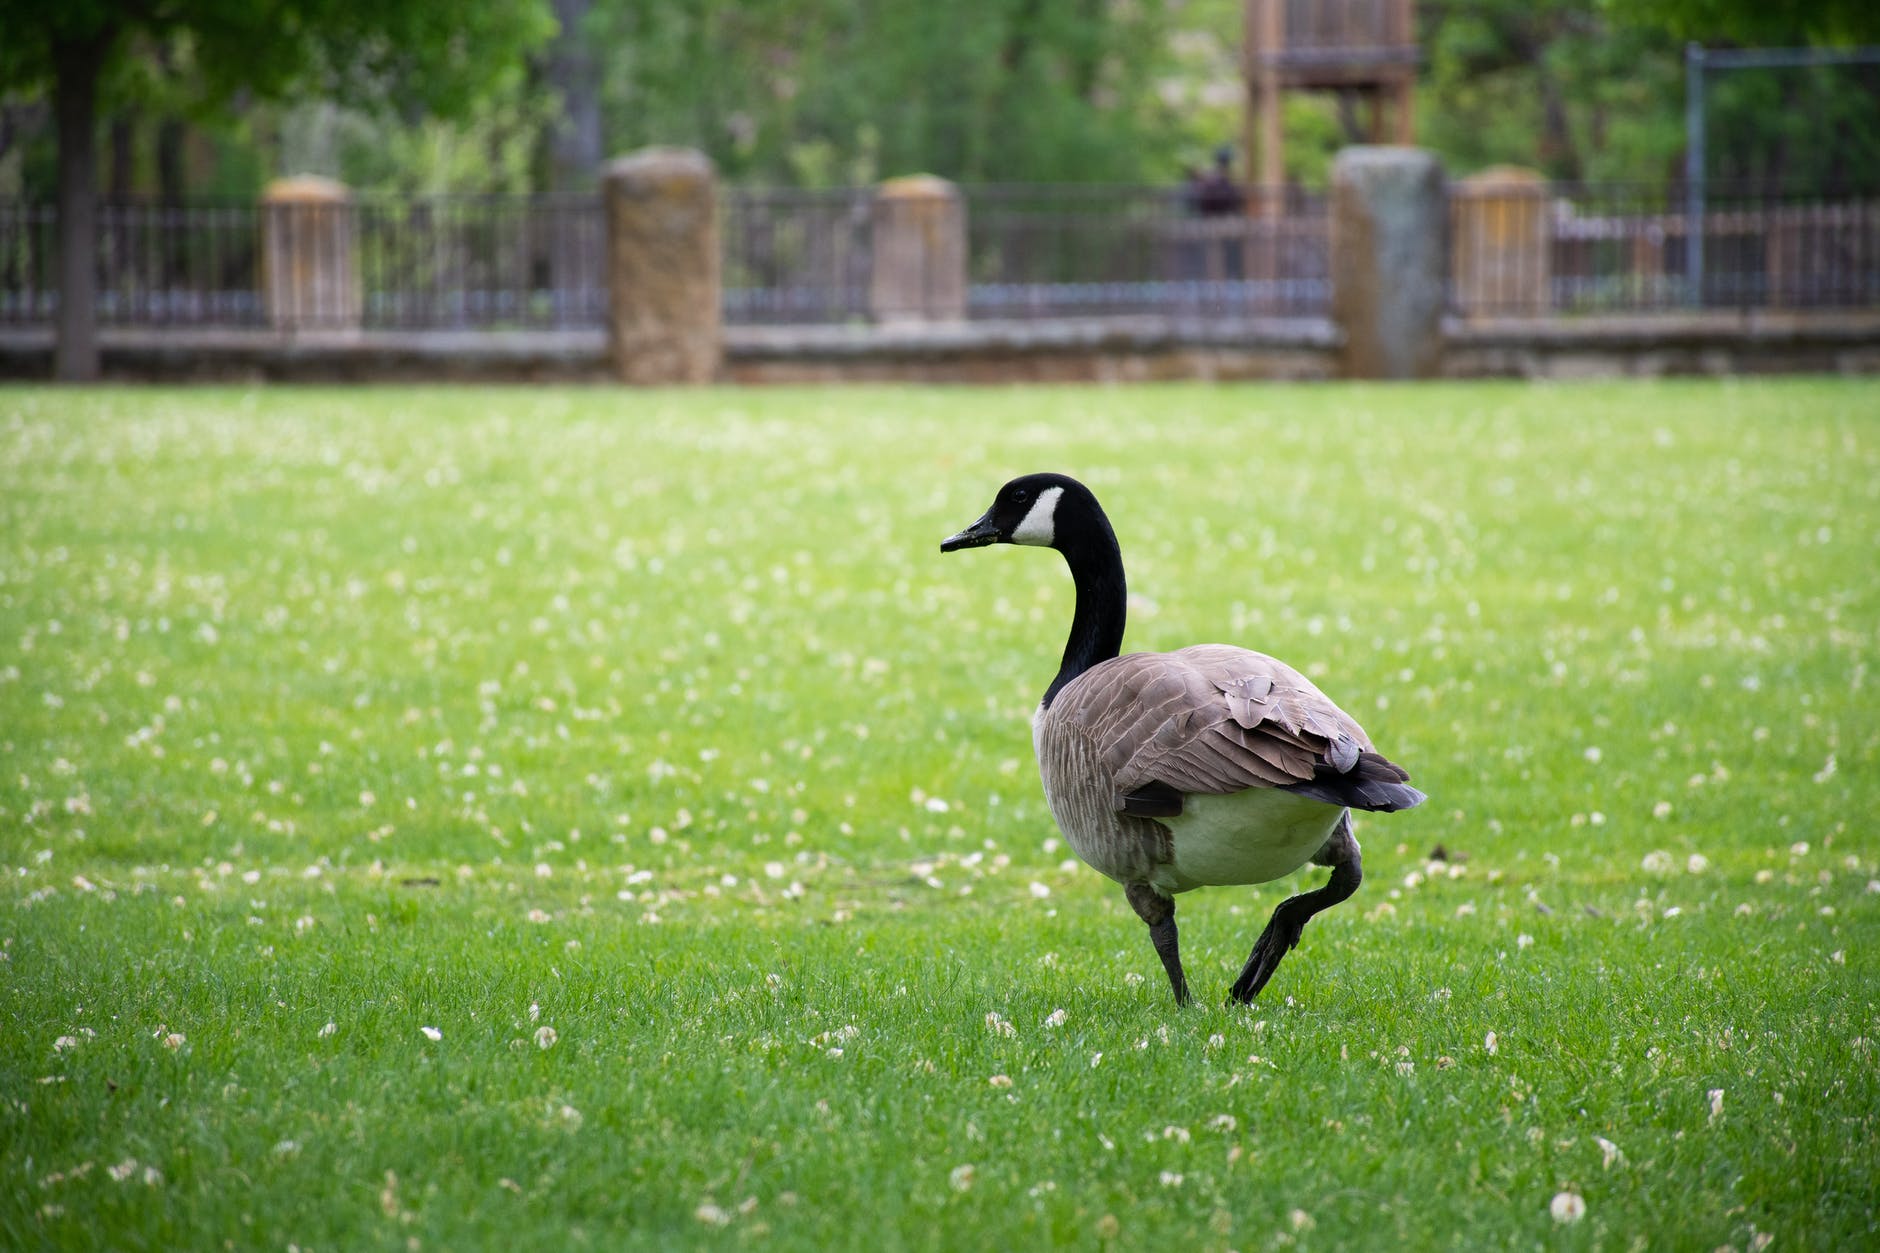 canadian goose on grass field